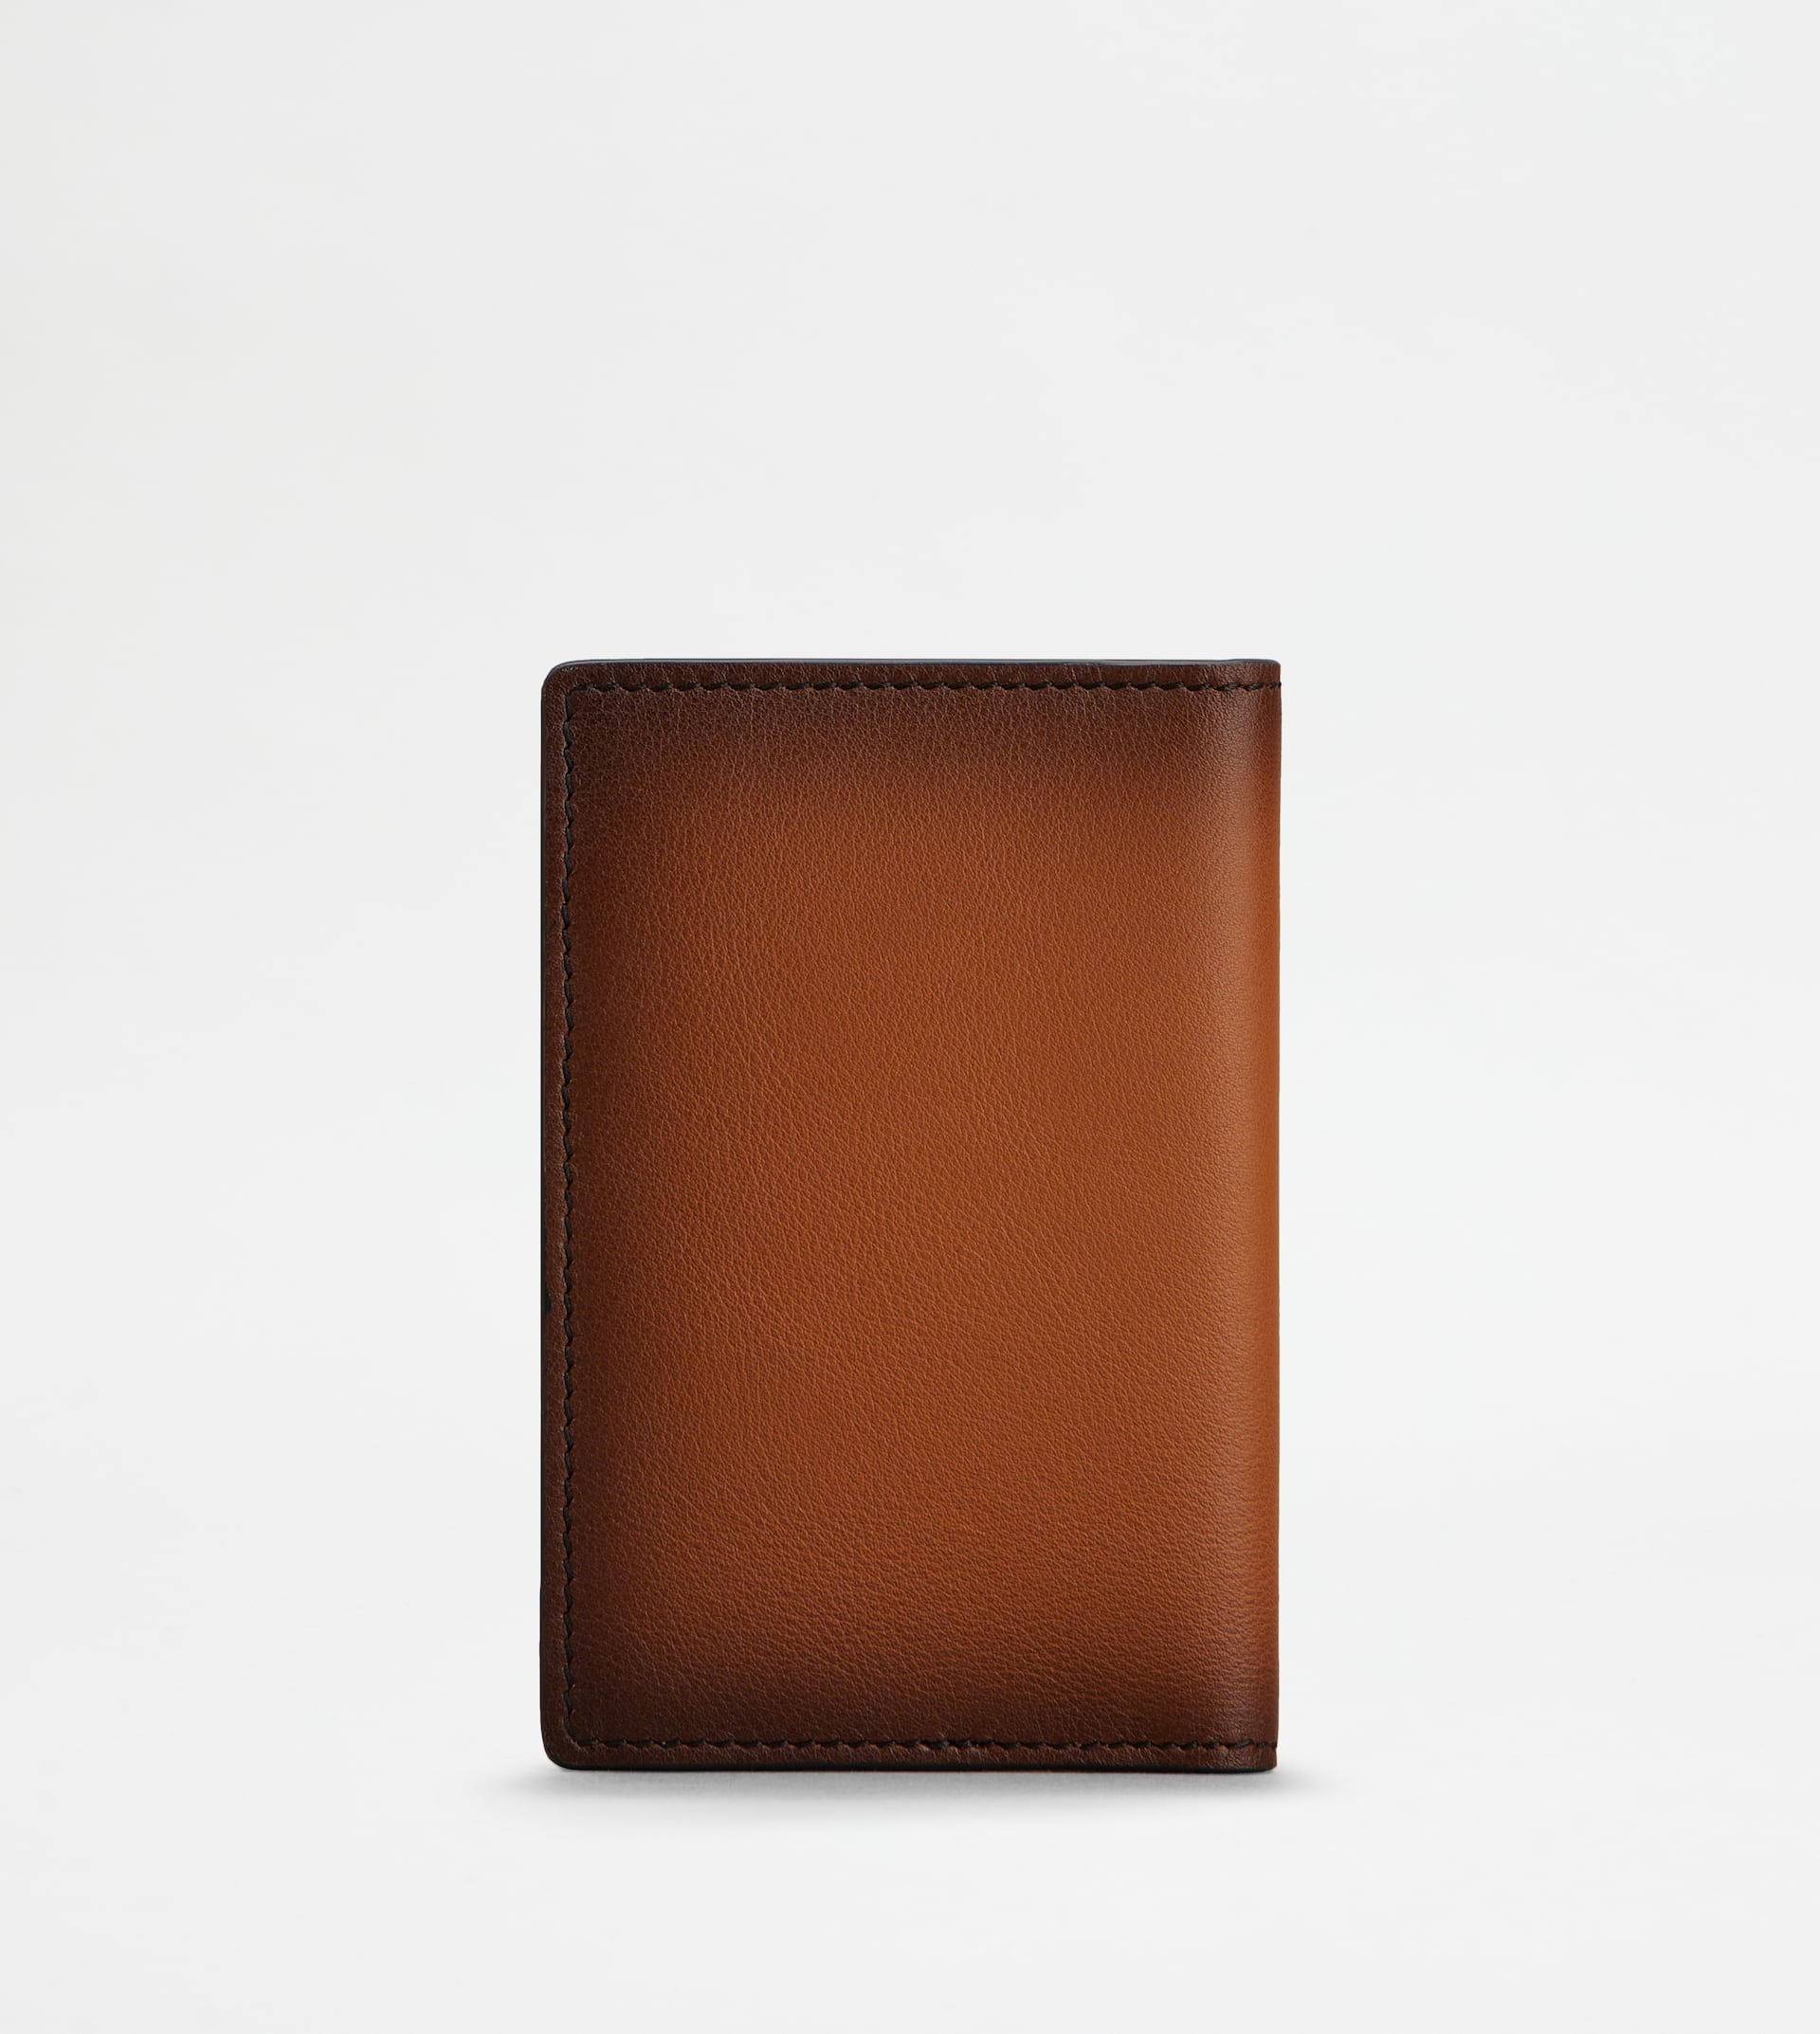 CARD HOLDER IN LEATHER - BROWN - 3